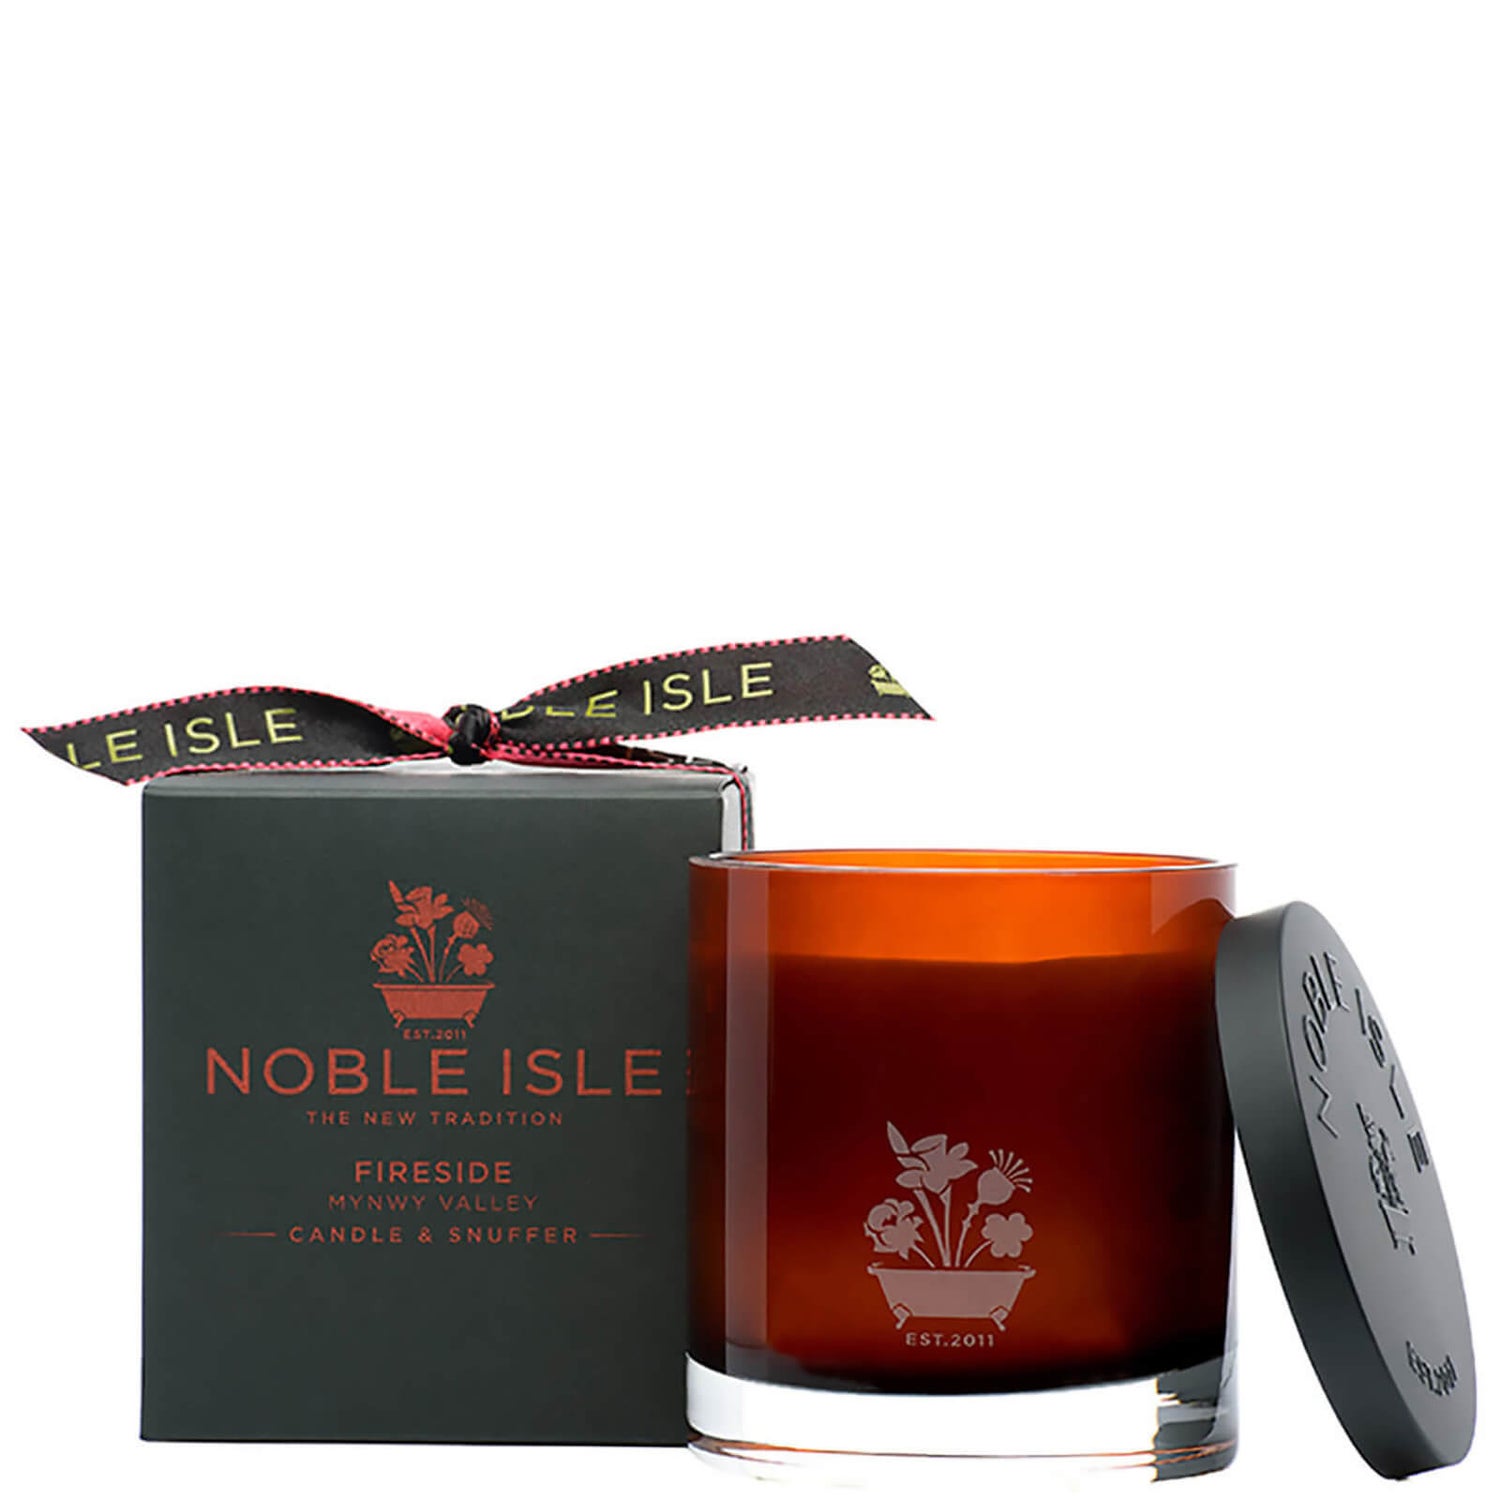 Noble Isle Fireside Candle & Snuffer